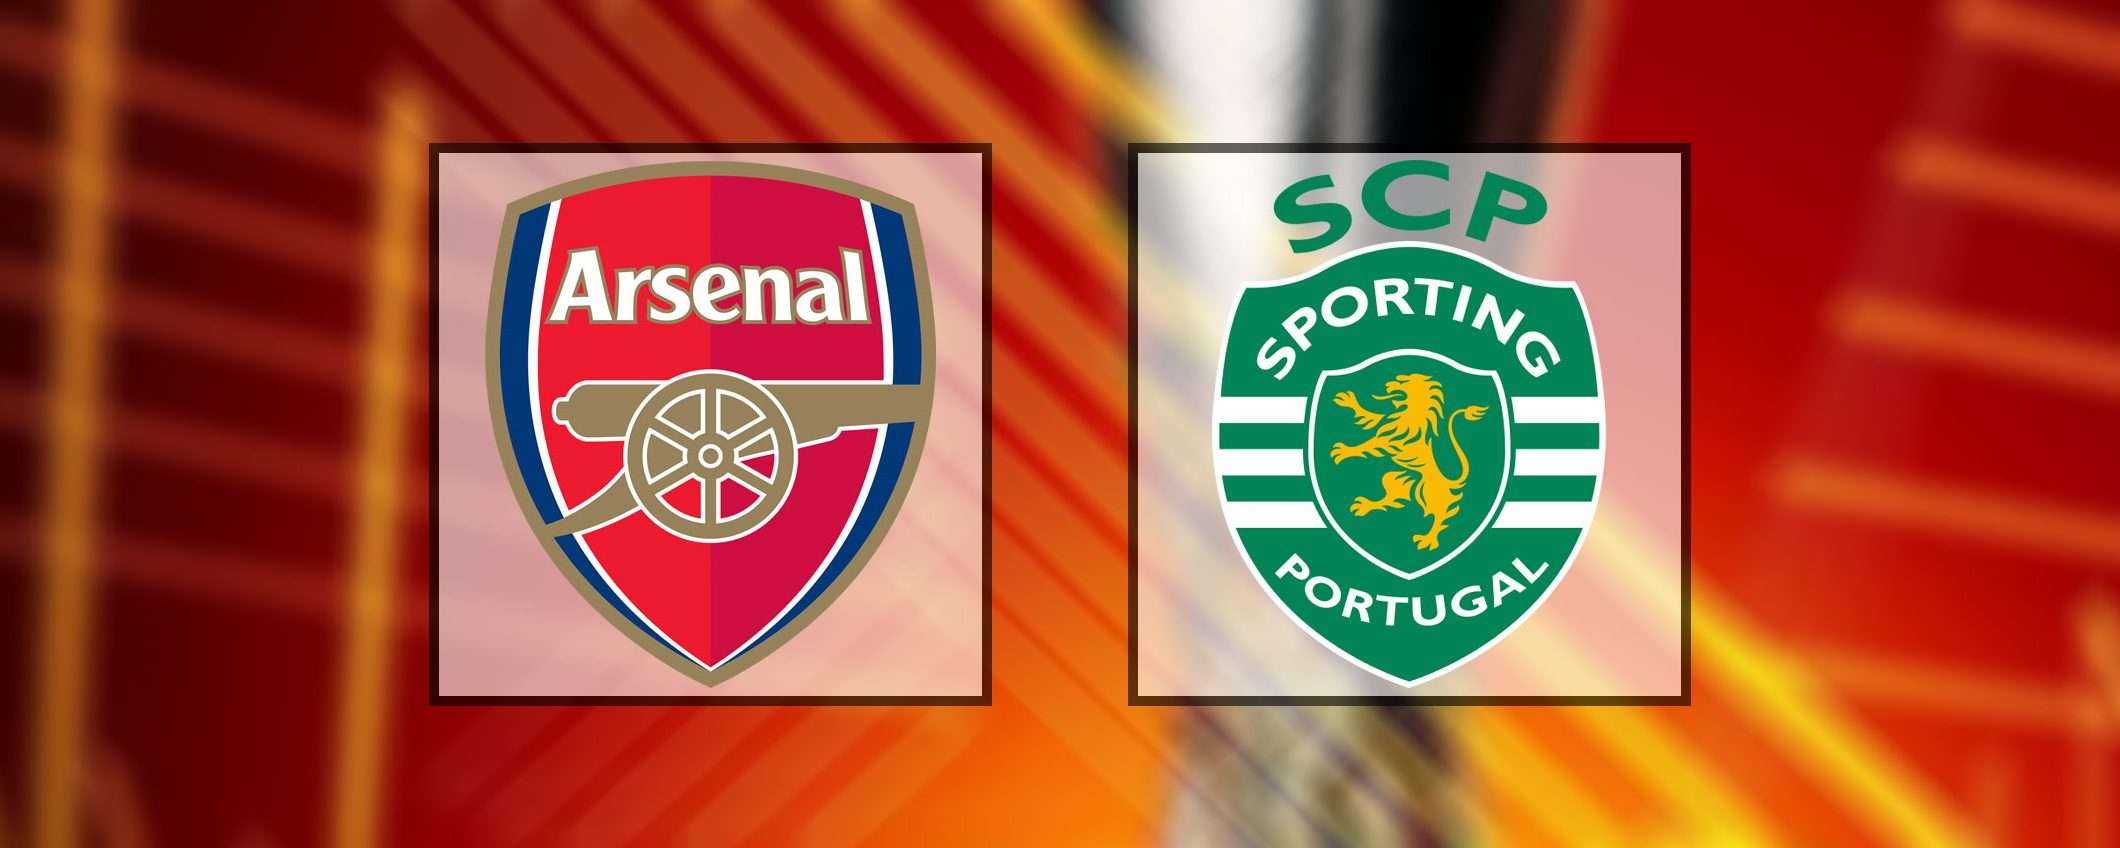 Come vedere Arsenal-Sporting in streaming